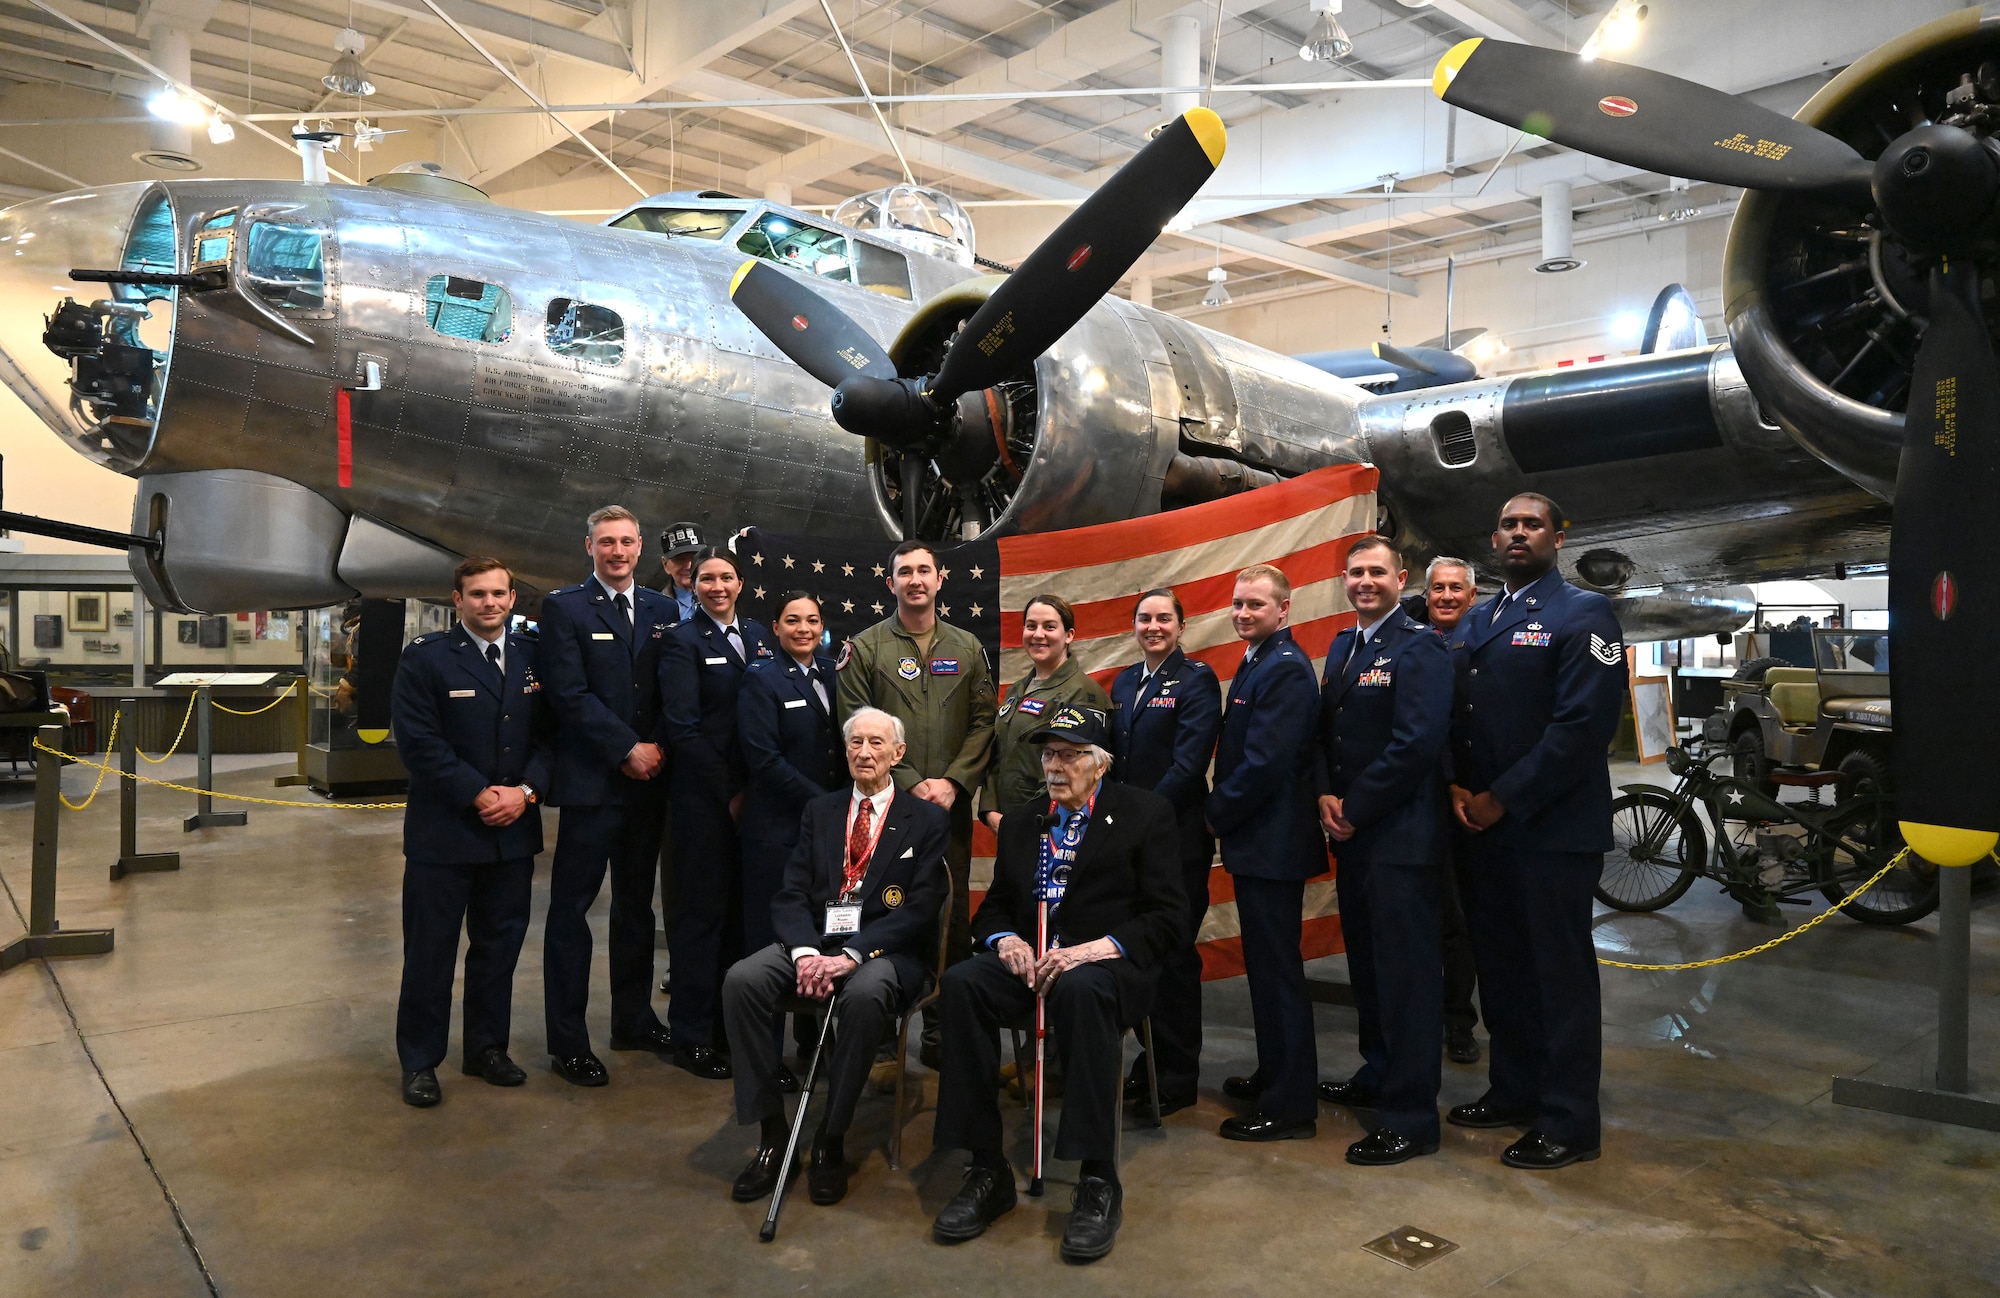 U.S. Air Force Airmen from Royal Air Force Mildenhall, along with 100th Bomb Group veterans and survivors, Capt. John “Lucky” Luckadoo, seated left, 351st Bomb Squadron pilot and operations officer, and Lt James Rasmussen, 349th Bomb Squadron navigator, and two sons of 100th BG veterans pose for a photo by a restored B-17 Flying Fortress, “The City of Savannah,” with the original flag that was flown over the 100th Bomb Group at Thorpe Abbotts during World War II, at the National Museum of the Mighty Eighth Air Force in Savannah, Georgia, May 27, 2023. When Thorpe Abbotts was decommissioned as a U.S. base in 1945, the flag was lowered. It has since been brought to every reunion since it began. (U.S. Air Force photo by Karen Abeyasekere)